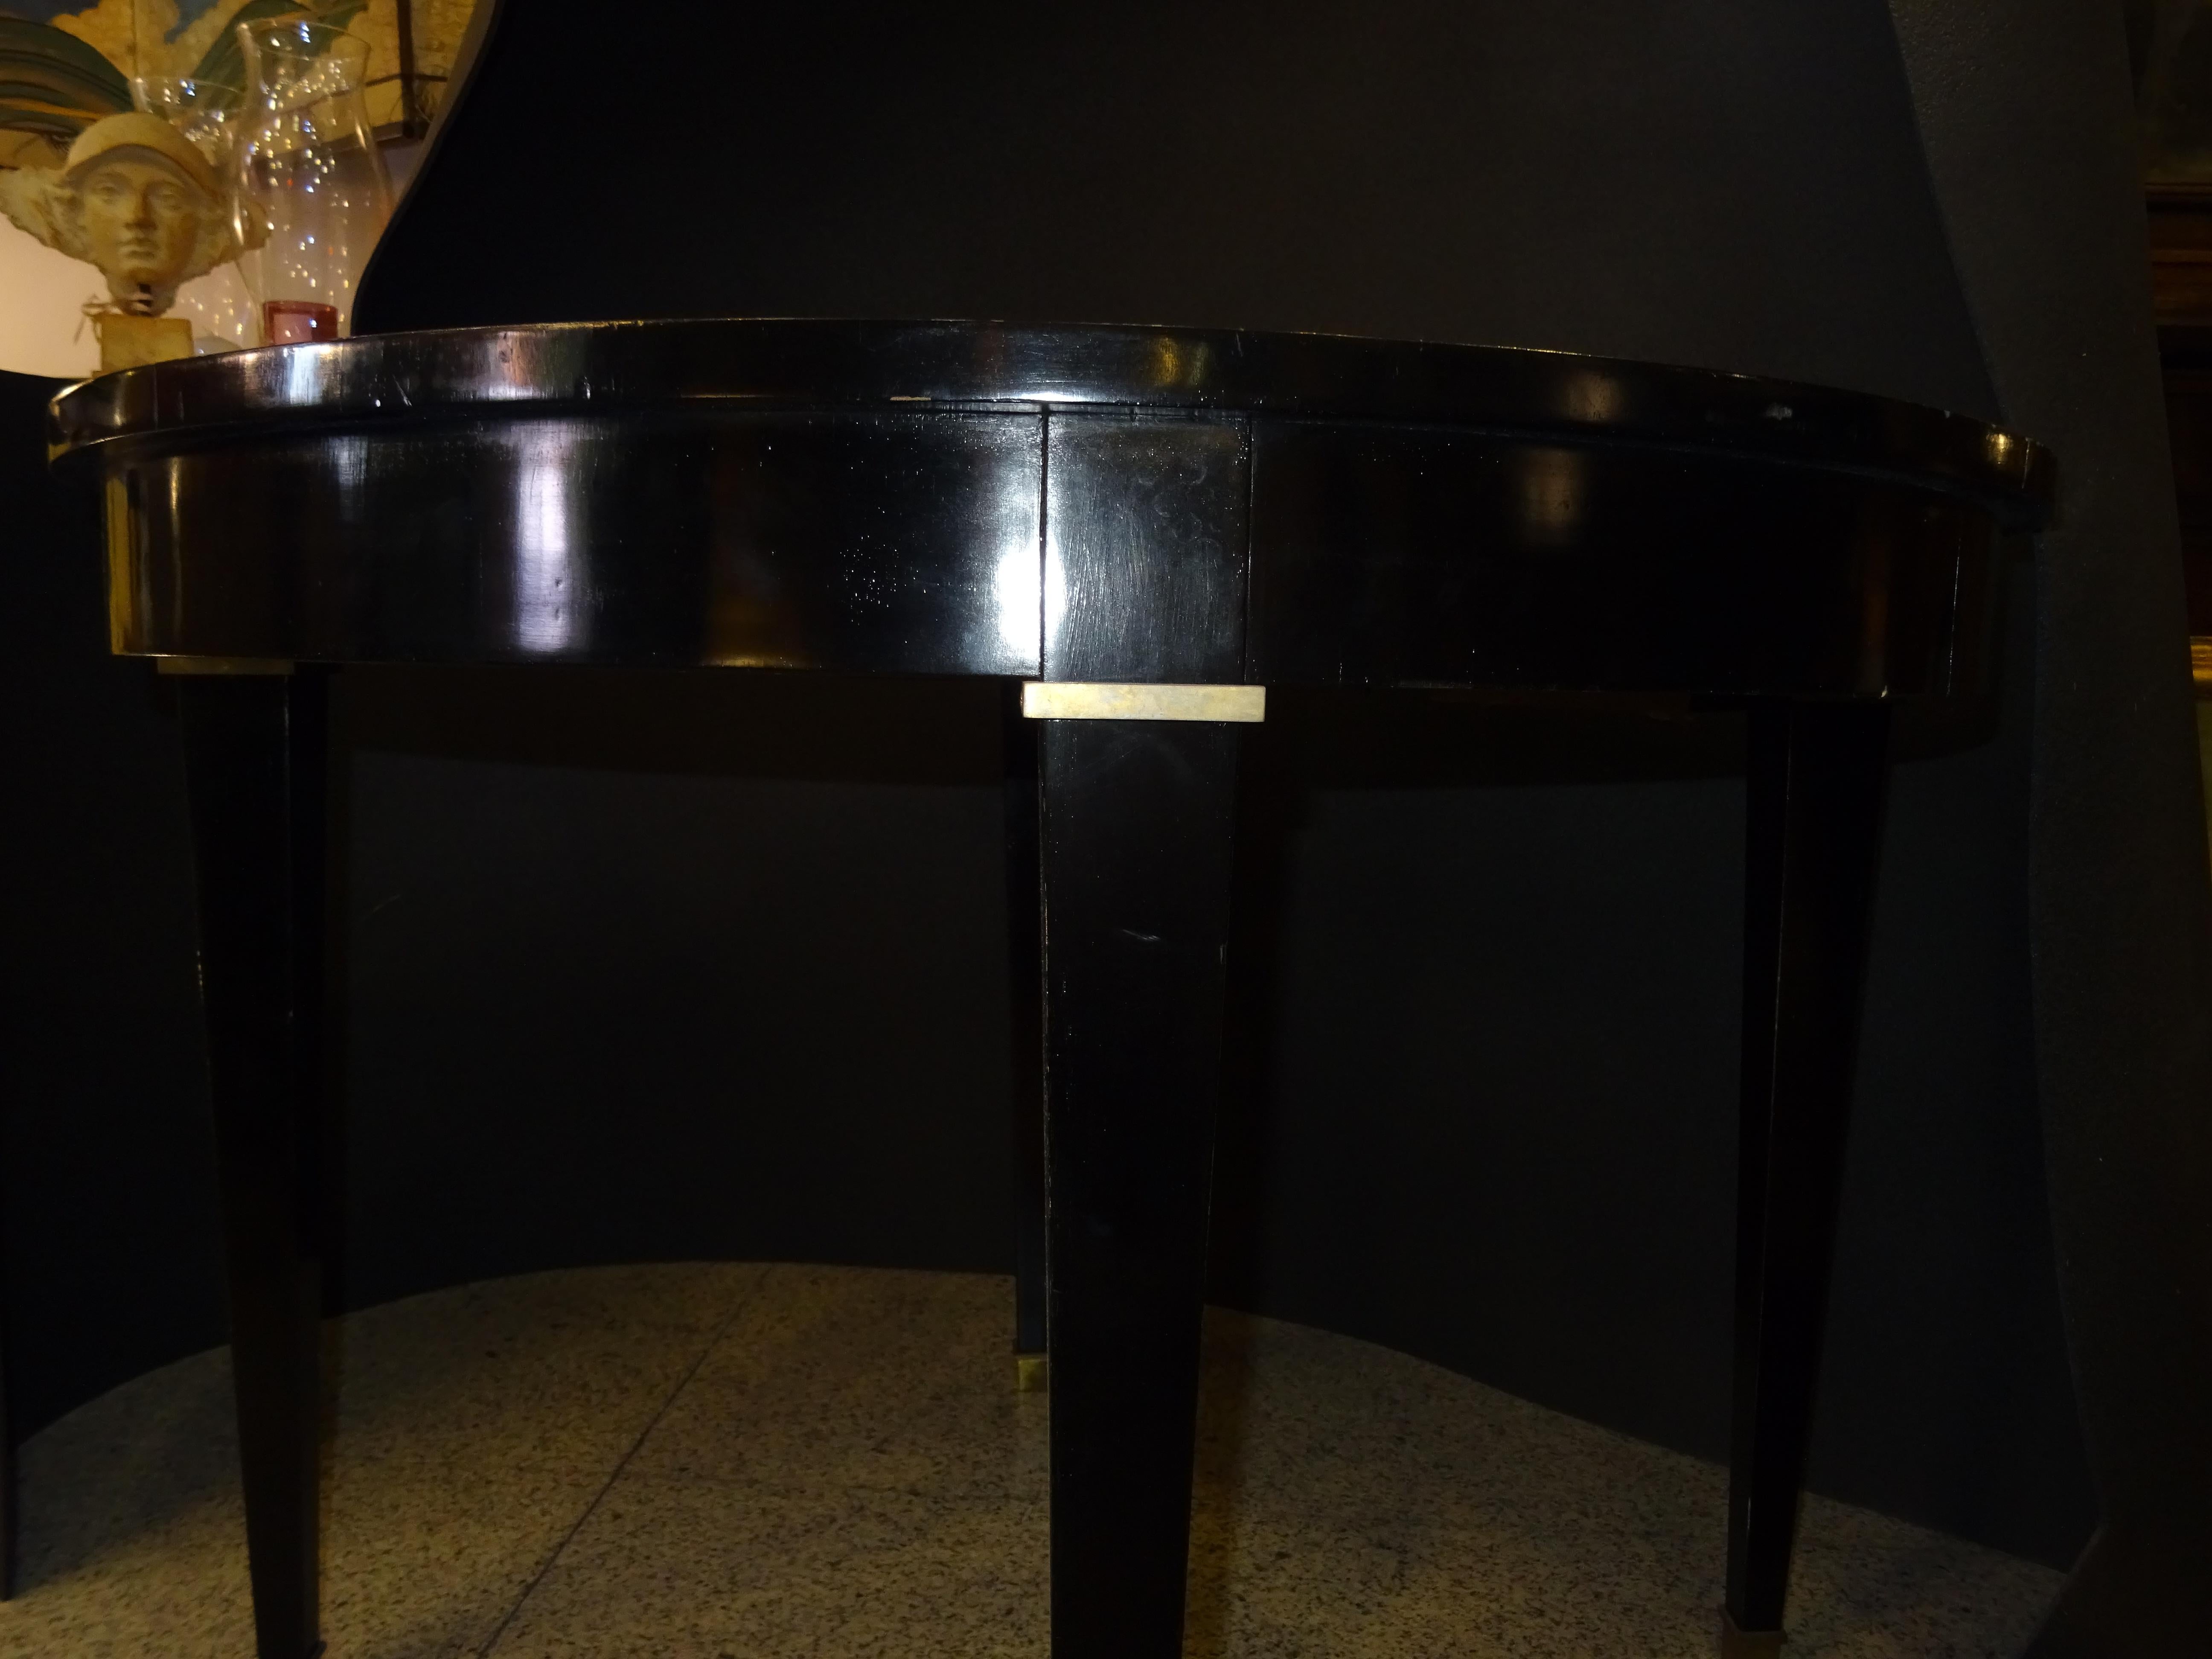 Outstanding and very refined round table by Jacques Adnet (1900-1984) one of the best architects and interior designers in the first half of the 20th century.
This table is in French black lacquered wood with a beautiful line of brass inlaid around